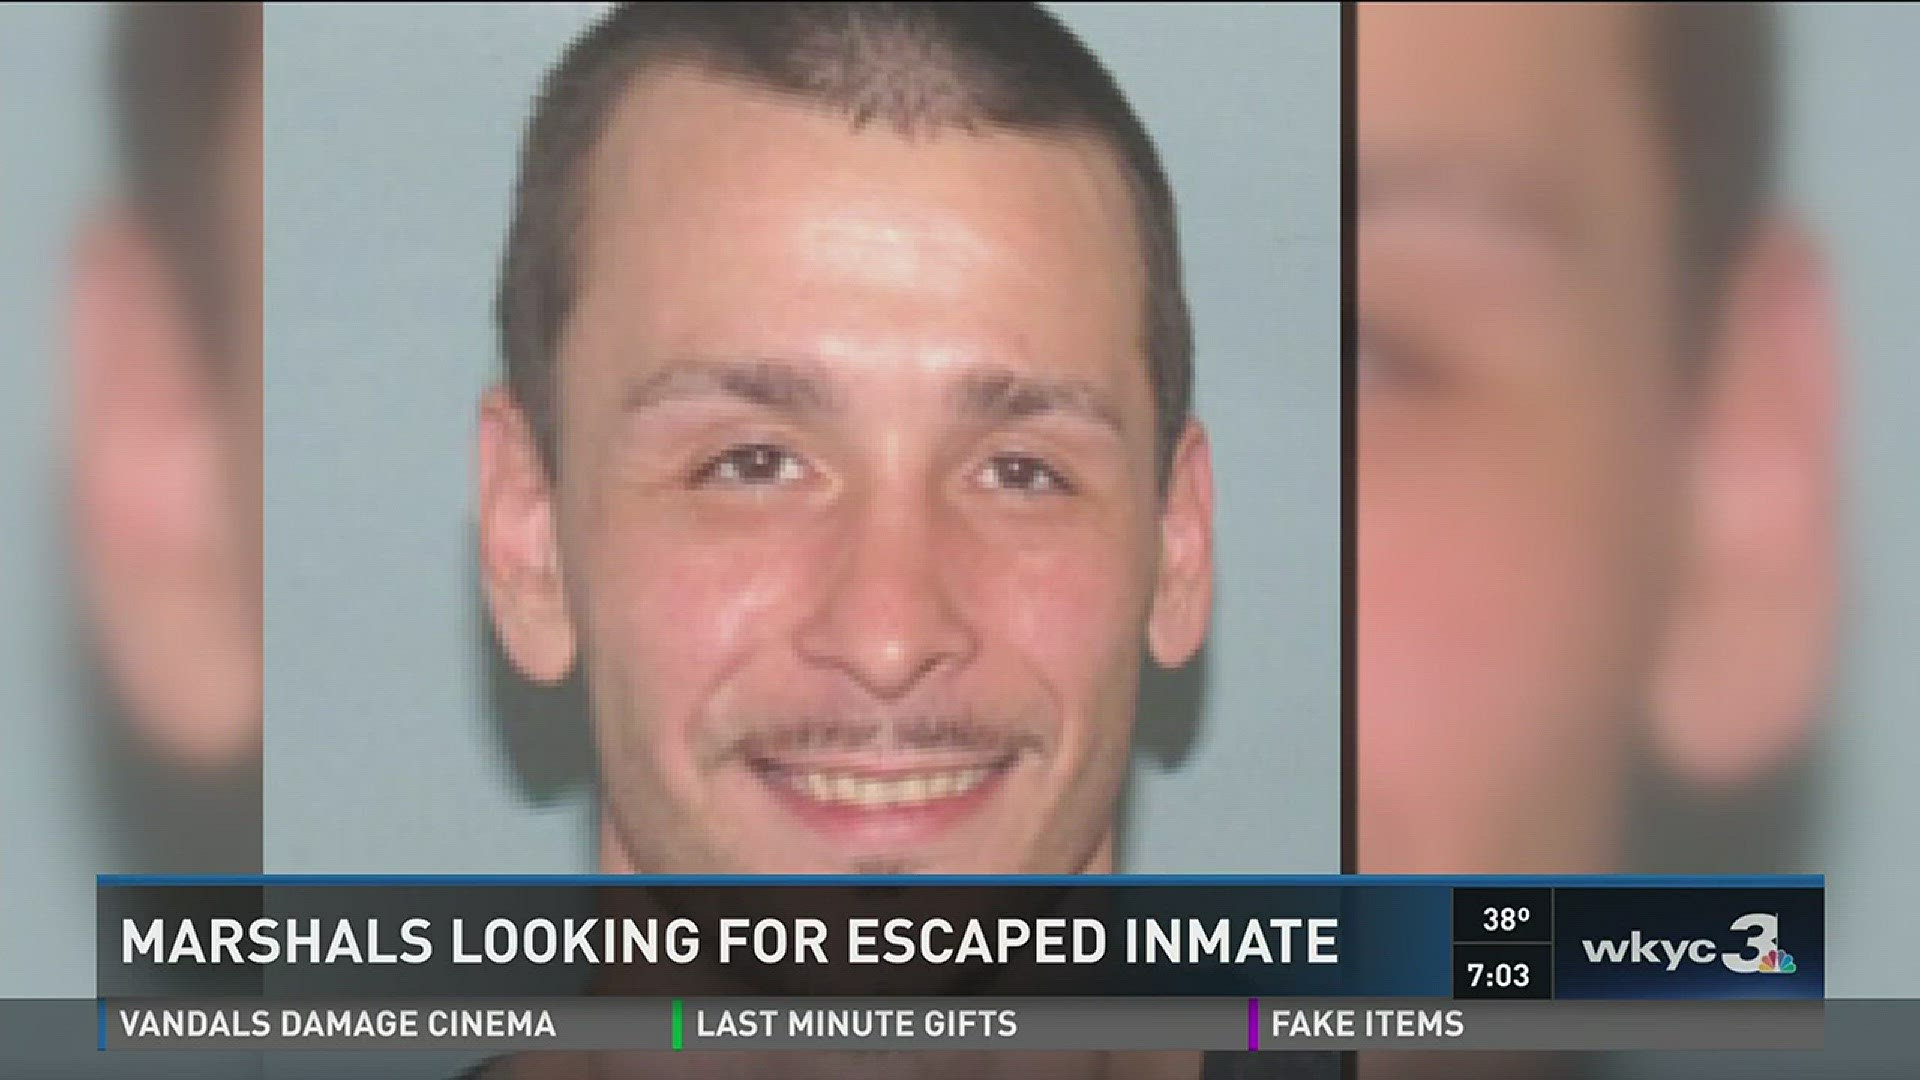 Marshals captured escaped inmate